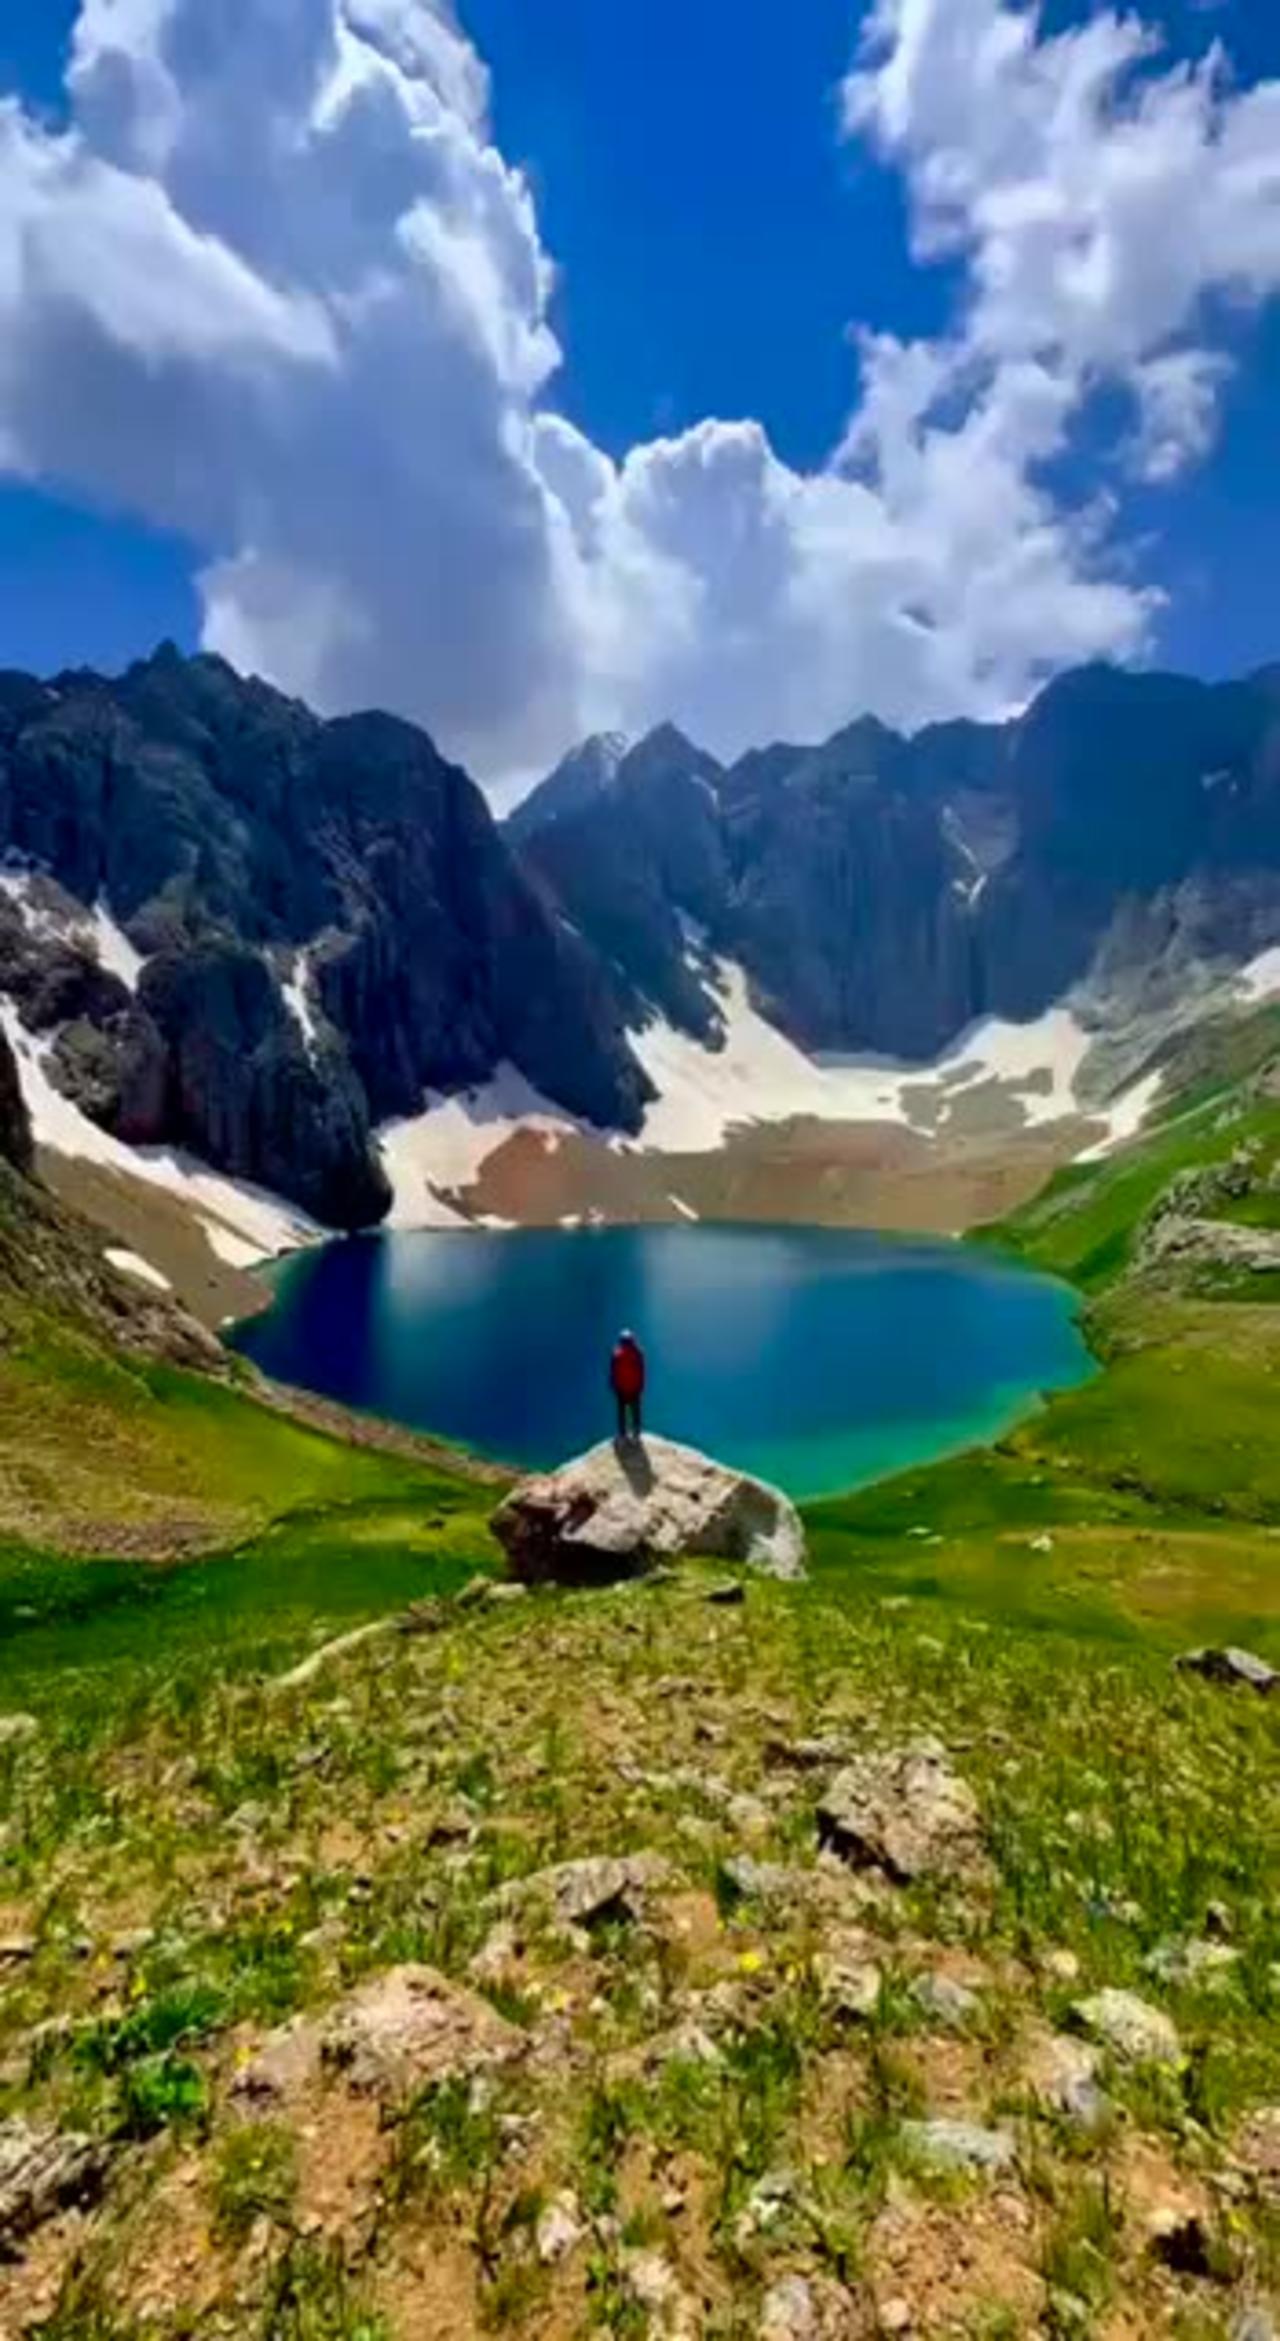 Kyrgyzstan - the country of lakes and snow-capped mountains